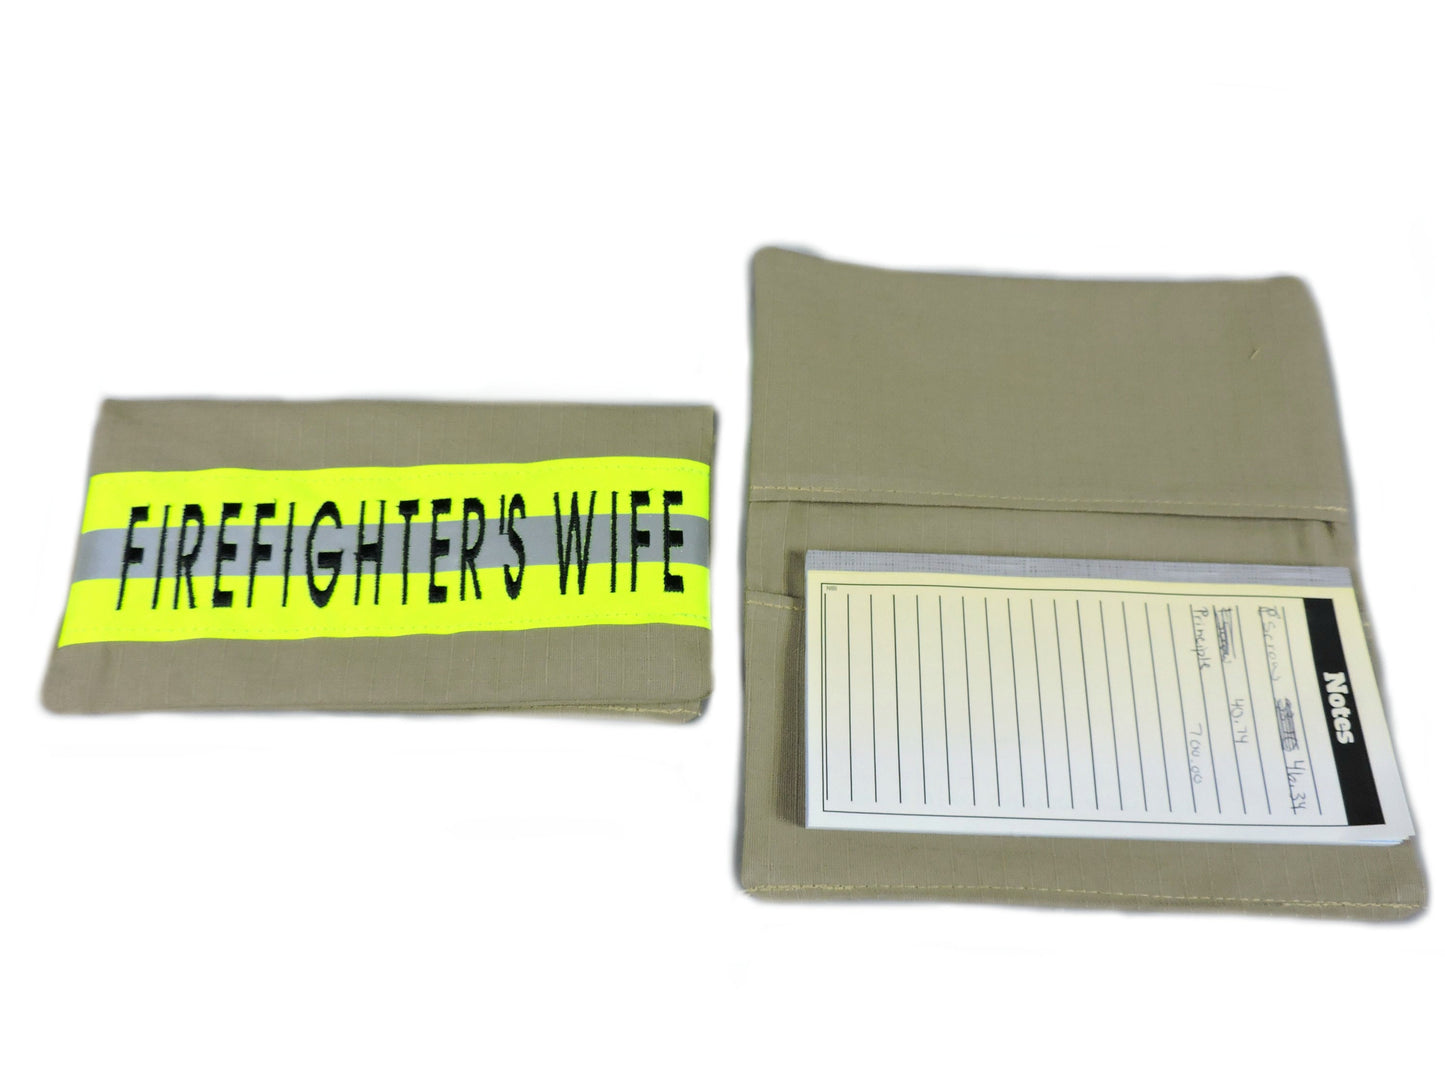 Firefighter wife checkbook cover 